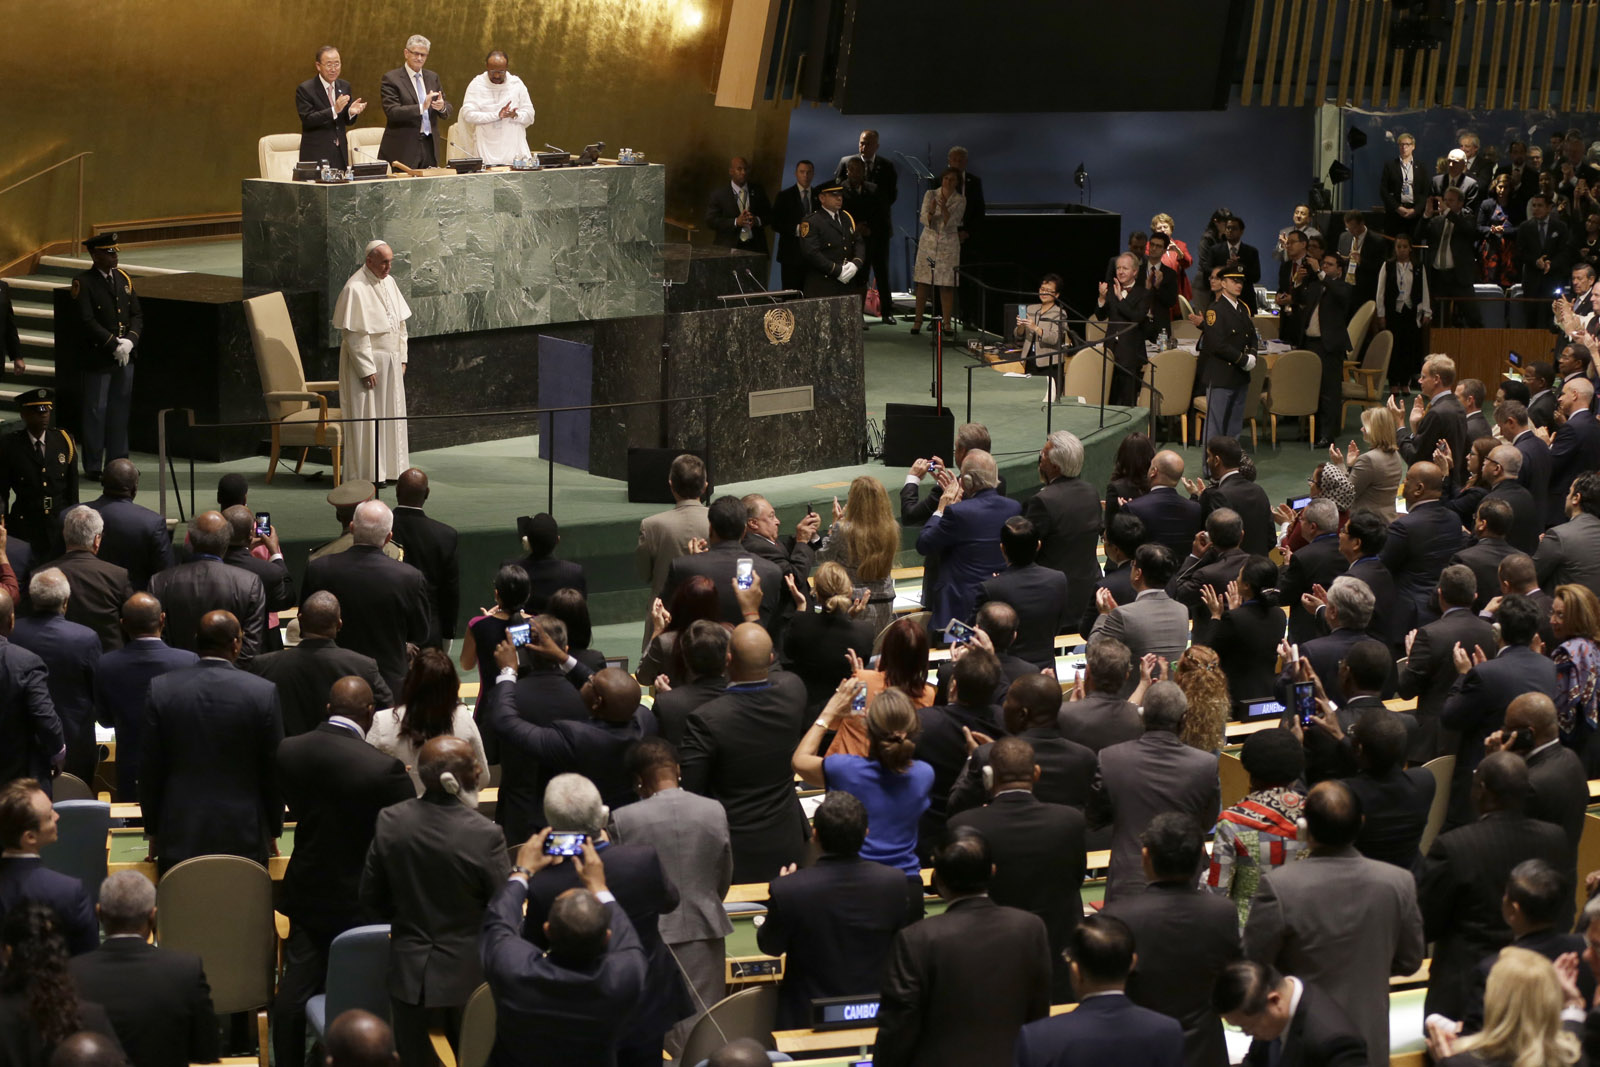 Pope Francis receives a standing ovation after addressing the 70th session of the United Nations General Assembly, Friday, Sept. 25, 2015 at United Nations headquarters.  (AP Photo/Mary Altaffer)